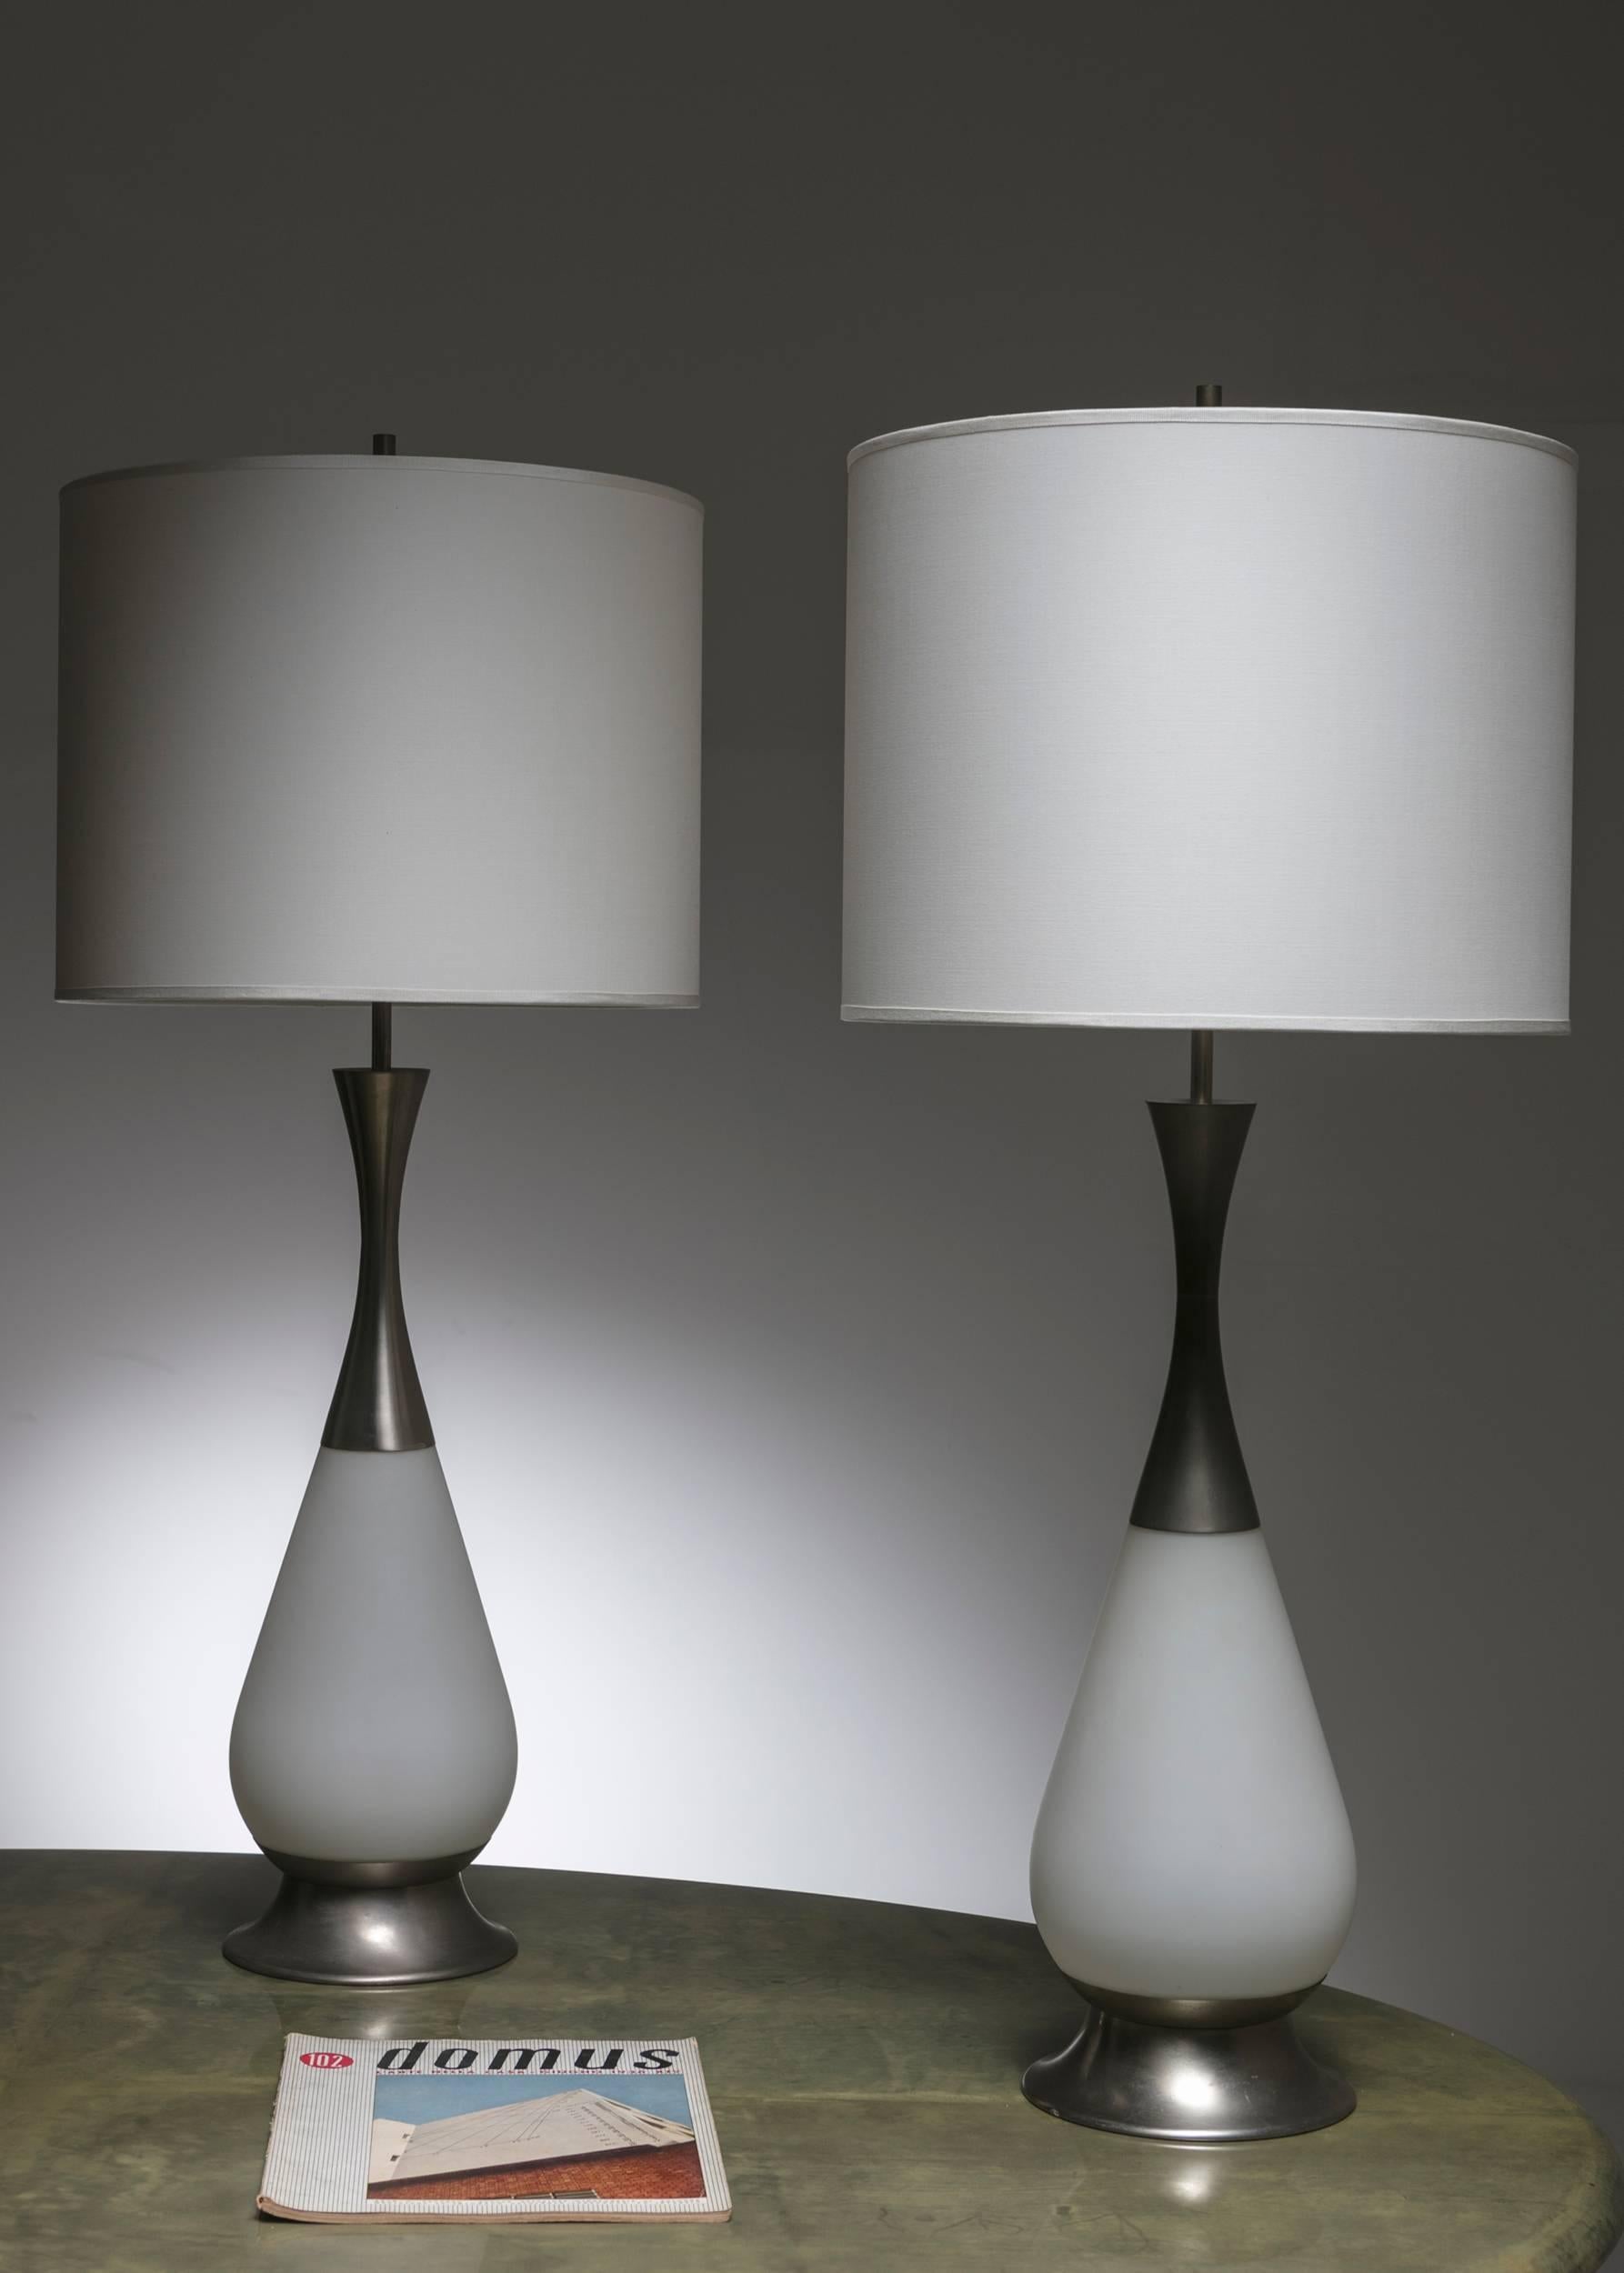 Marvellous Set of Two Stilnovo Table Lamps, Italy, 1960s For Sale 1